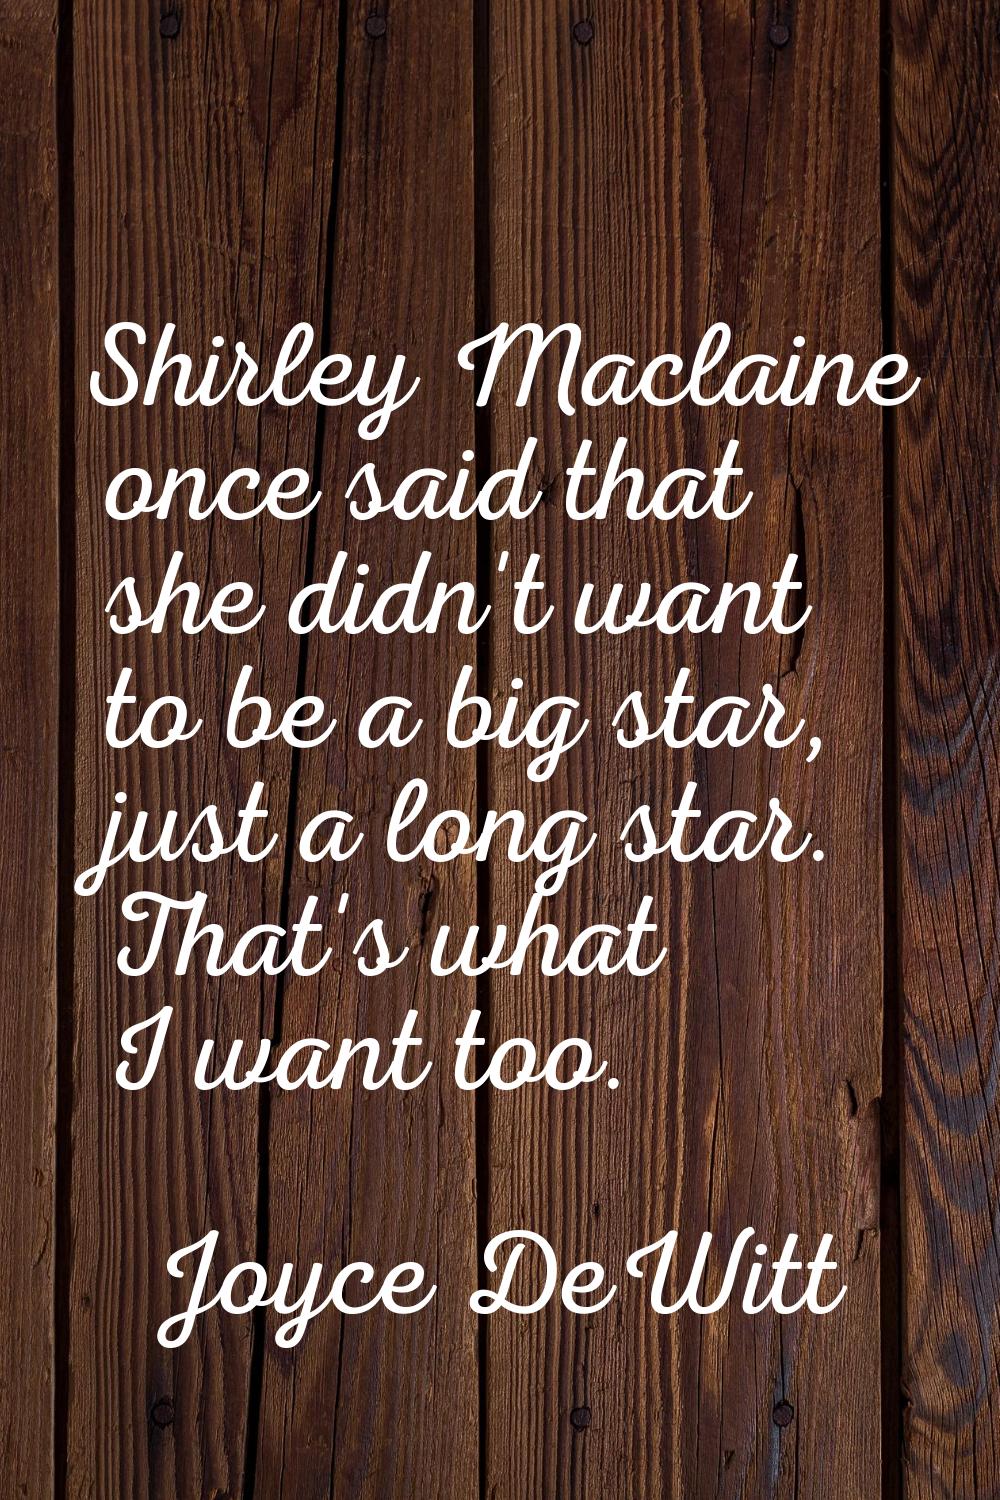 Shirley Maclaine once said that she didn't want to be a big star, just a long star. That's what I w